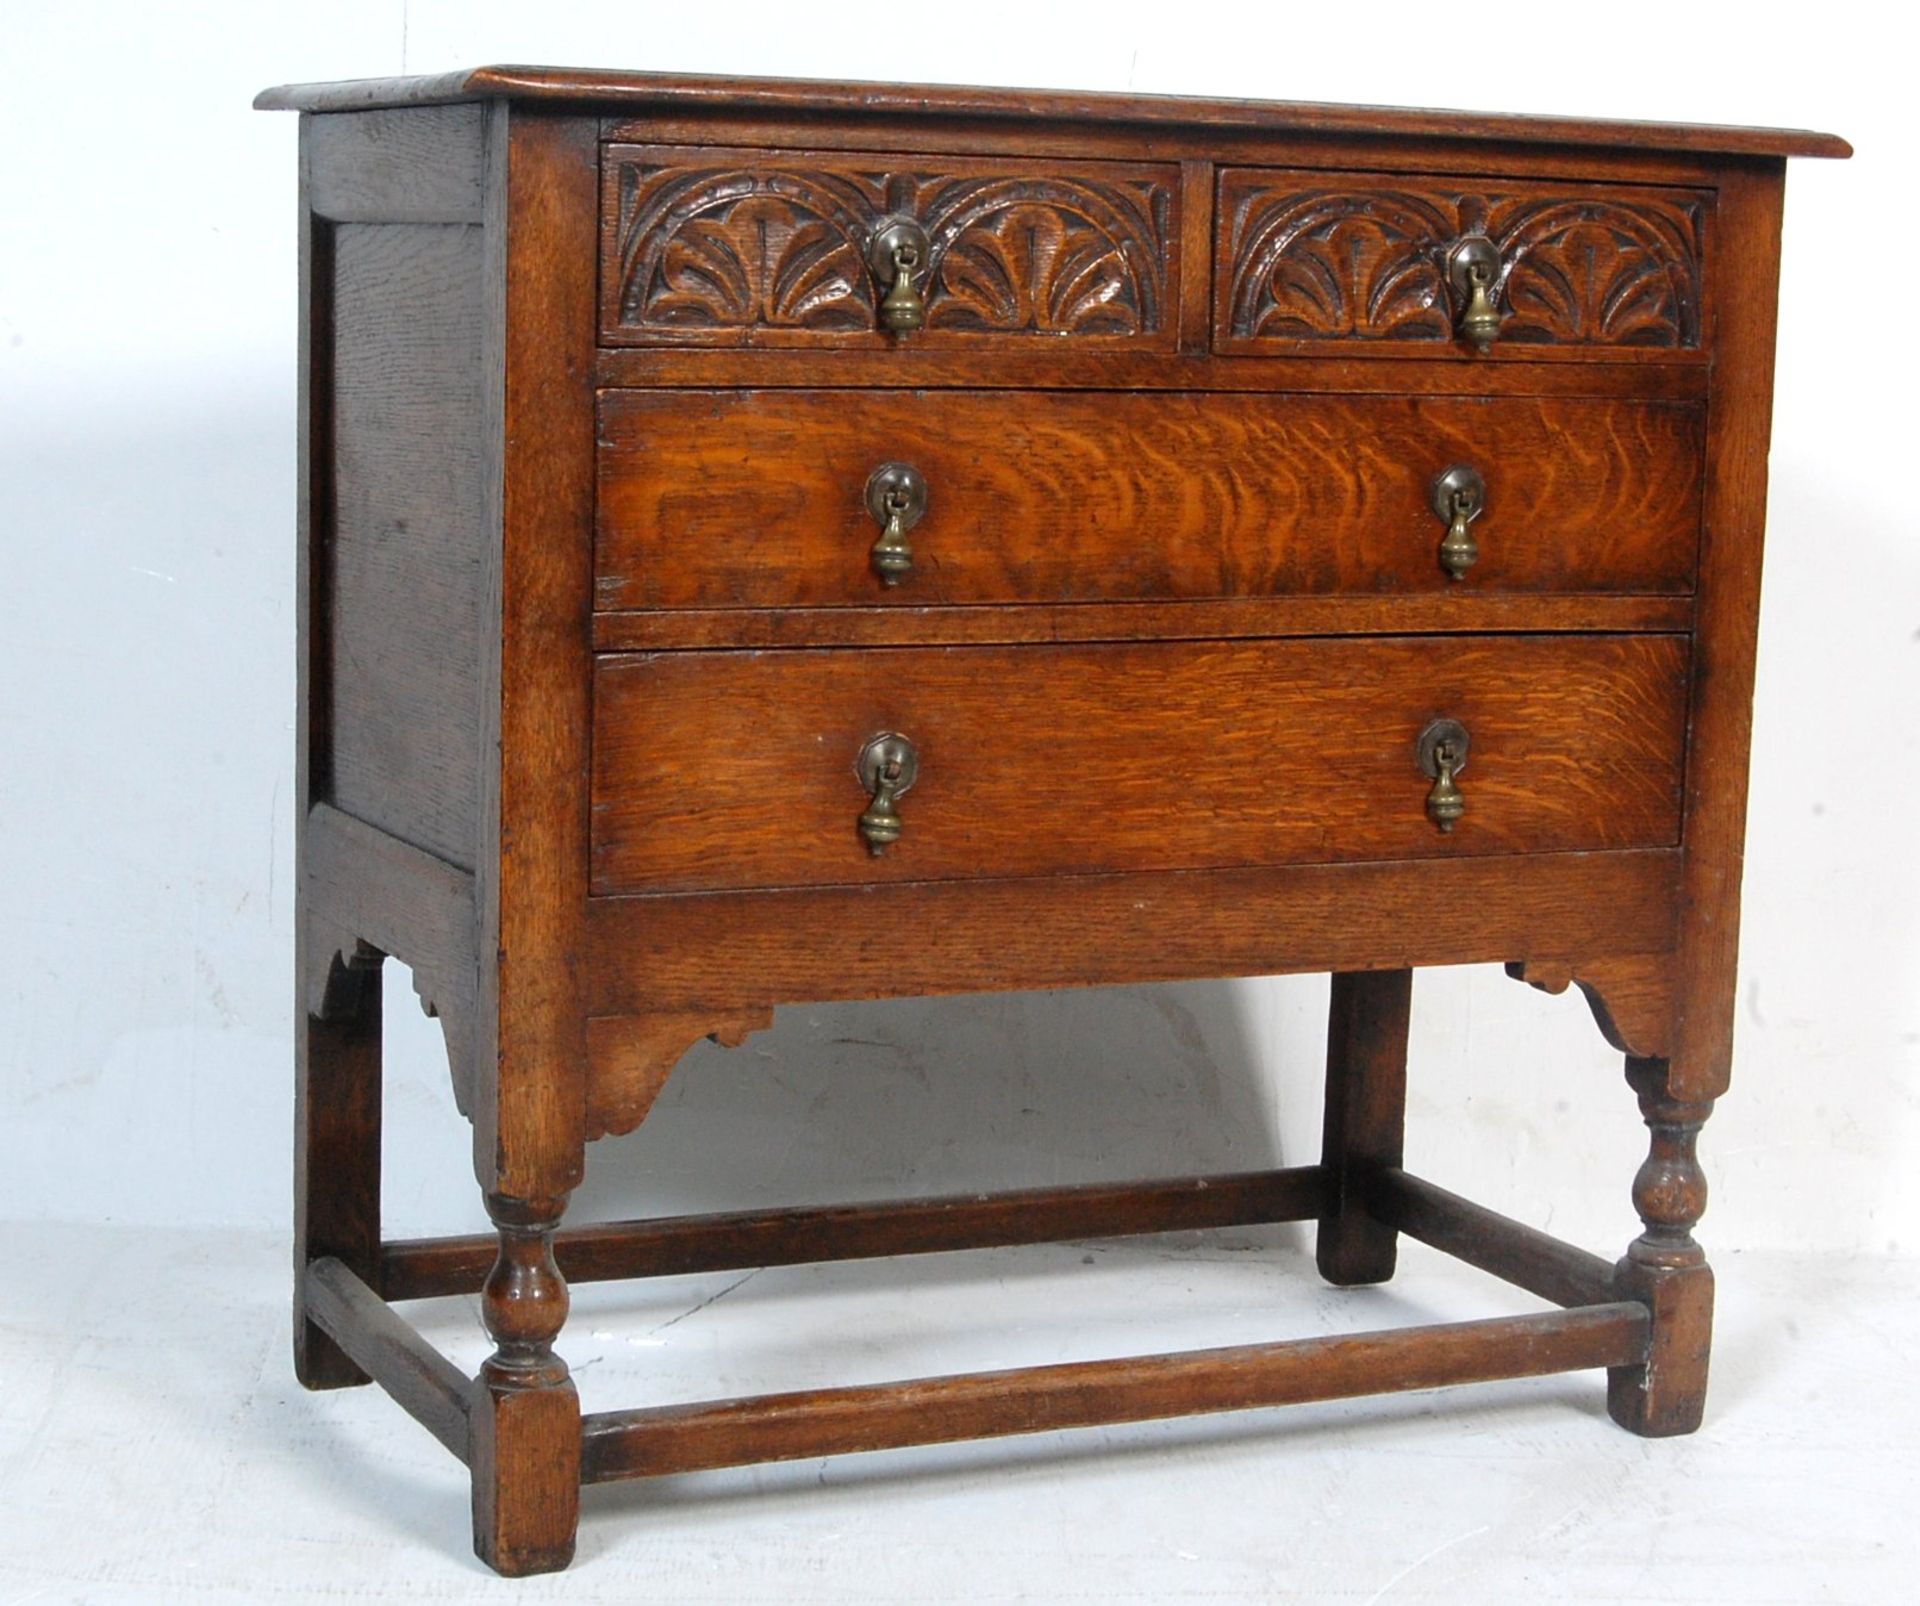 17TH CENTURY REVIVAL CARVED OAK CHEST OF DRAWERS